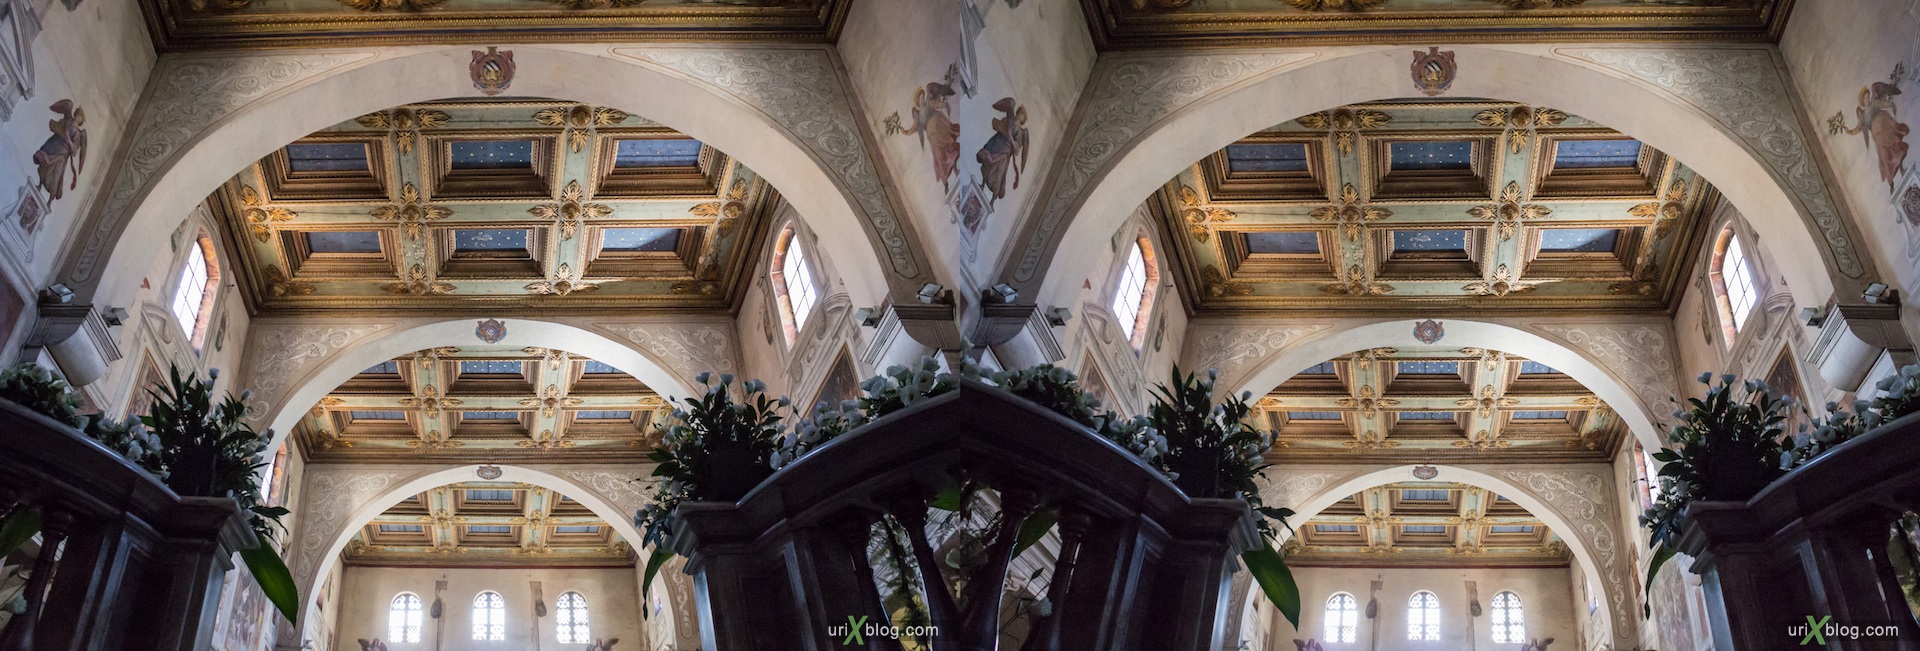 2012, Santa Prassede church, Rome, Italy, cathedral, monastery, Christianity, Catholicism, 3D, stereo pair, cross-eyed, crossview, cross view stereo pair